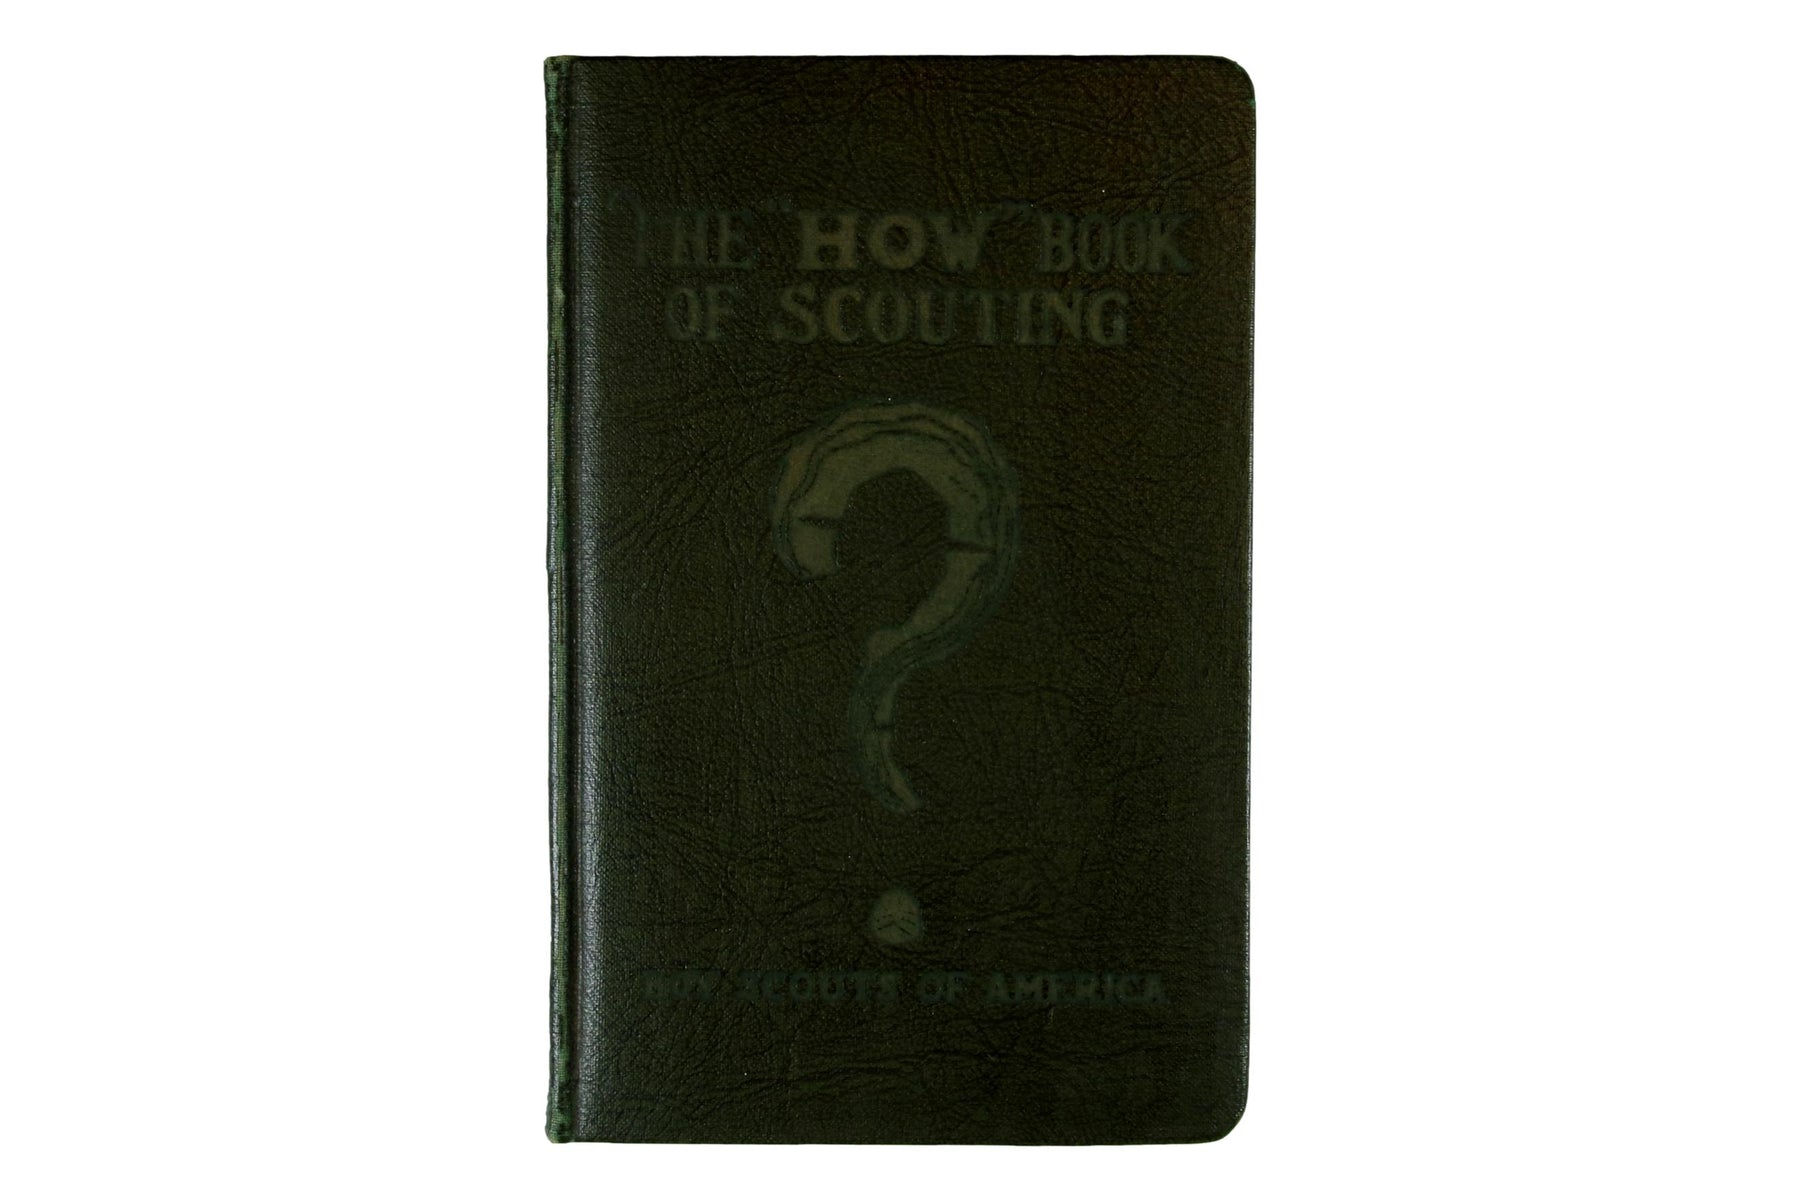 How Book of Scouting 1928